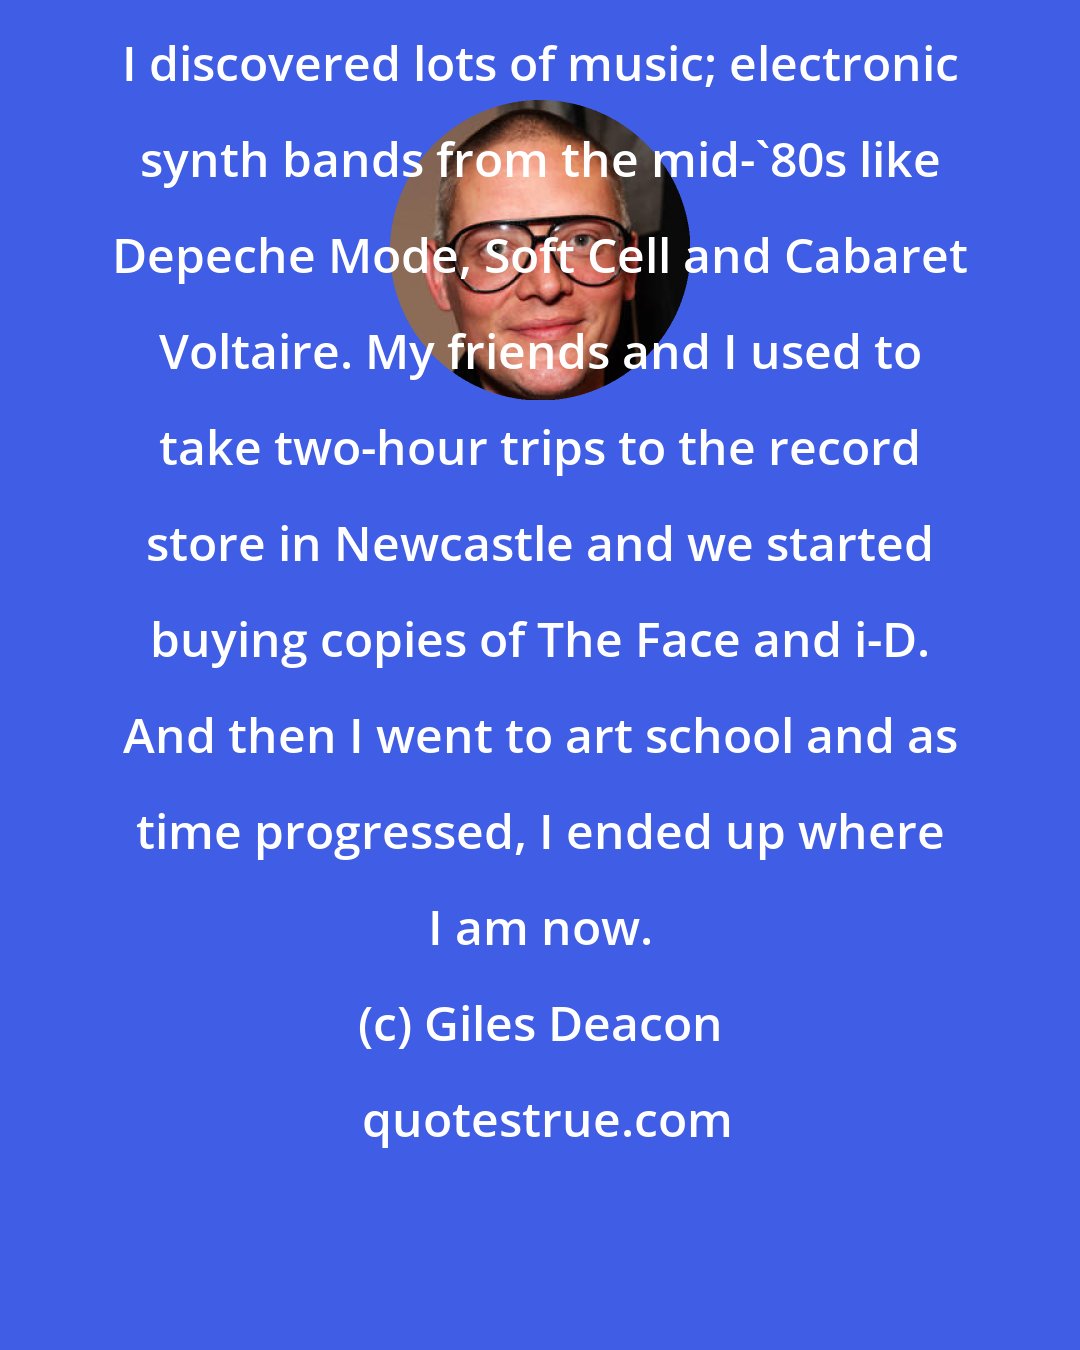 Giles Deacon: I discovered lots of music; electronic synth bands from the mid-'80s like Depeche Mode, Soft Cell and Cabaret Voltaire. My friends and I used to take two-hour trips to the record store in Newcastle and we started buying copies of The Face and i-D. And then I went to art school and as time progressed, I ended up where I am now.